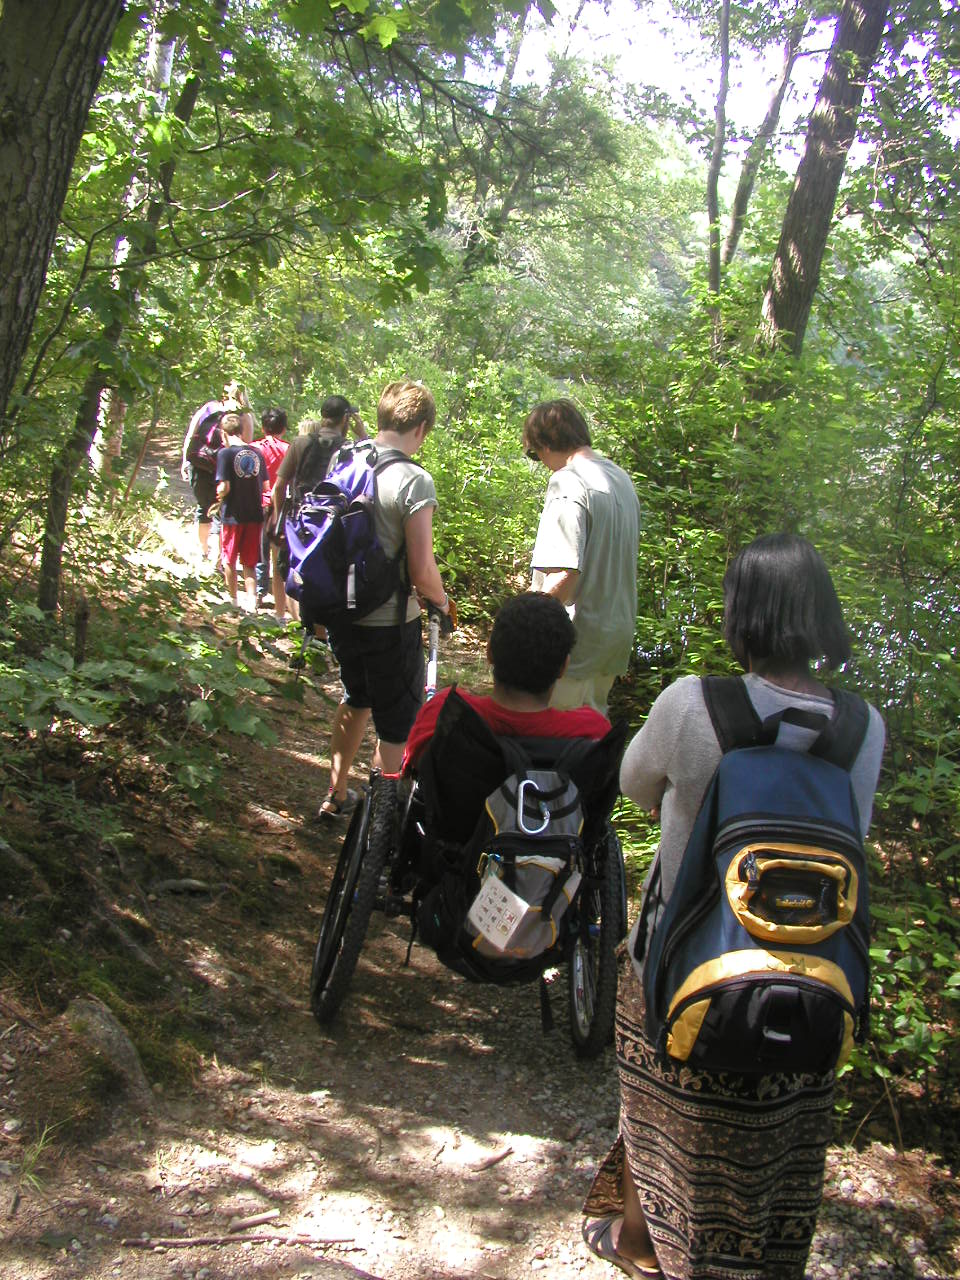 Hikers traveling on an accessible trail through the woods